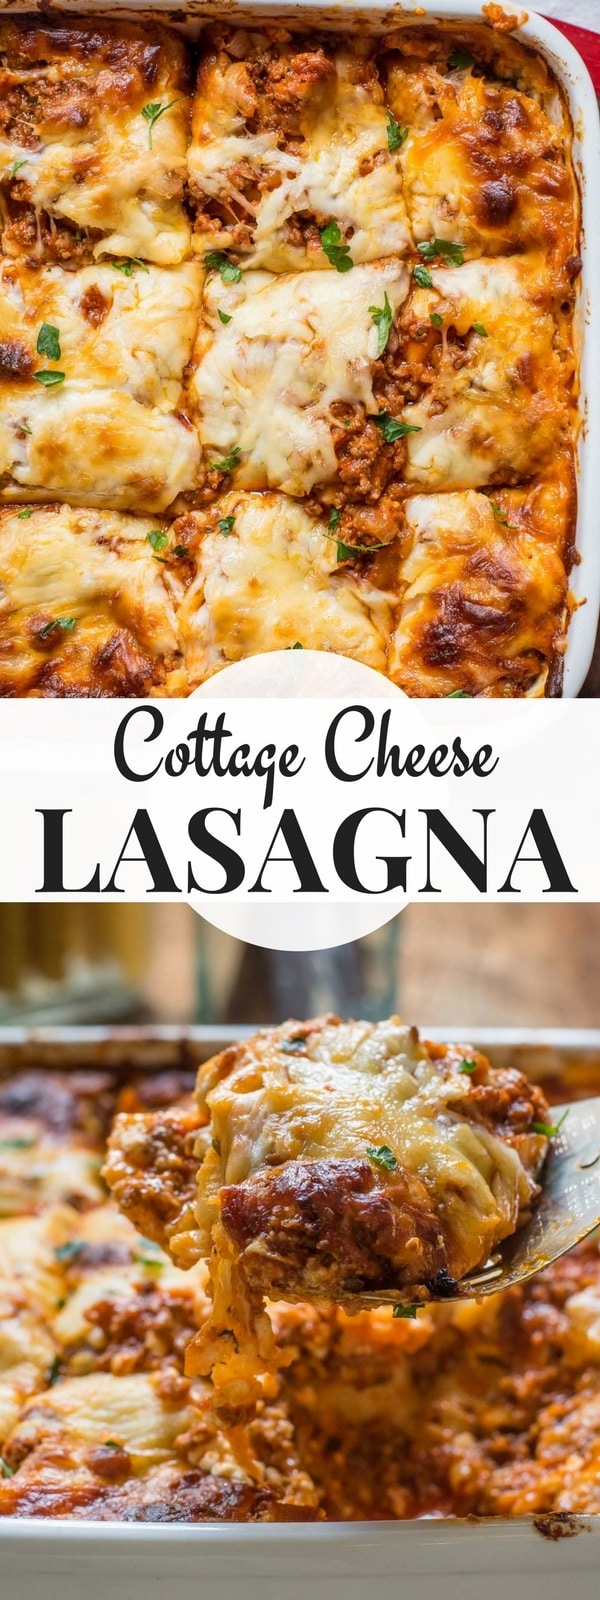 This Cottage Cheese Lasagna is the very BEST creamy, saucy, ultra cheesy lasagna recipe. 